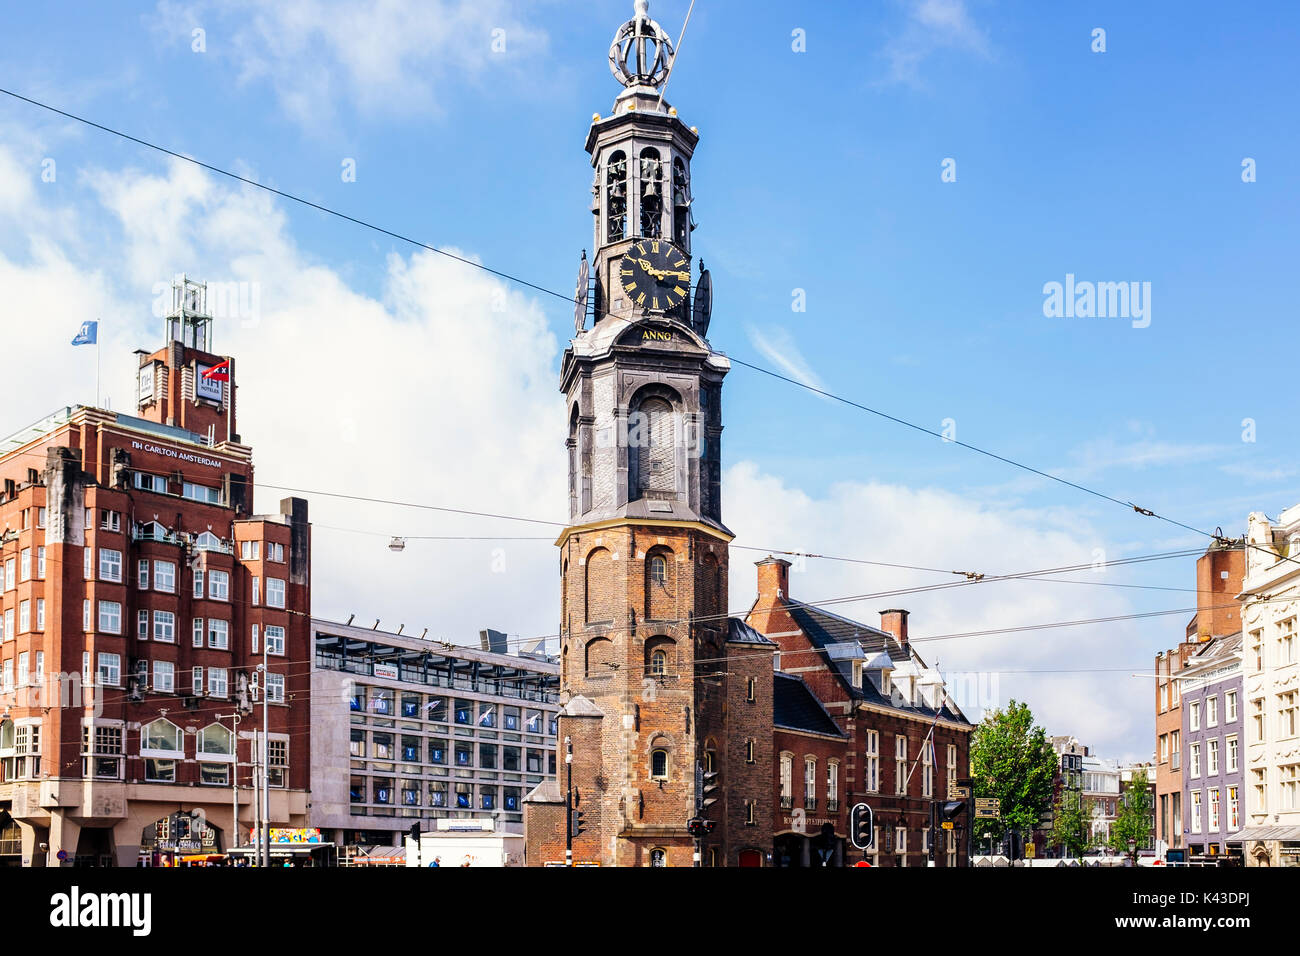 The Munttoren (Mint Tower) or Munt is a tower in Amsterdam Stock Photo